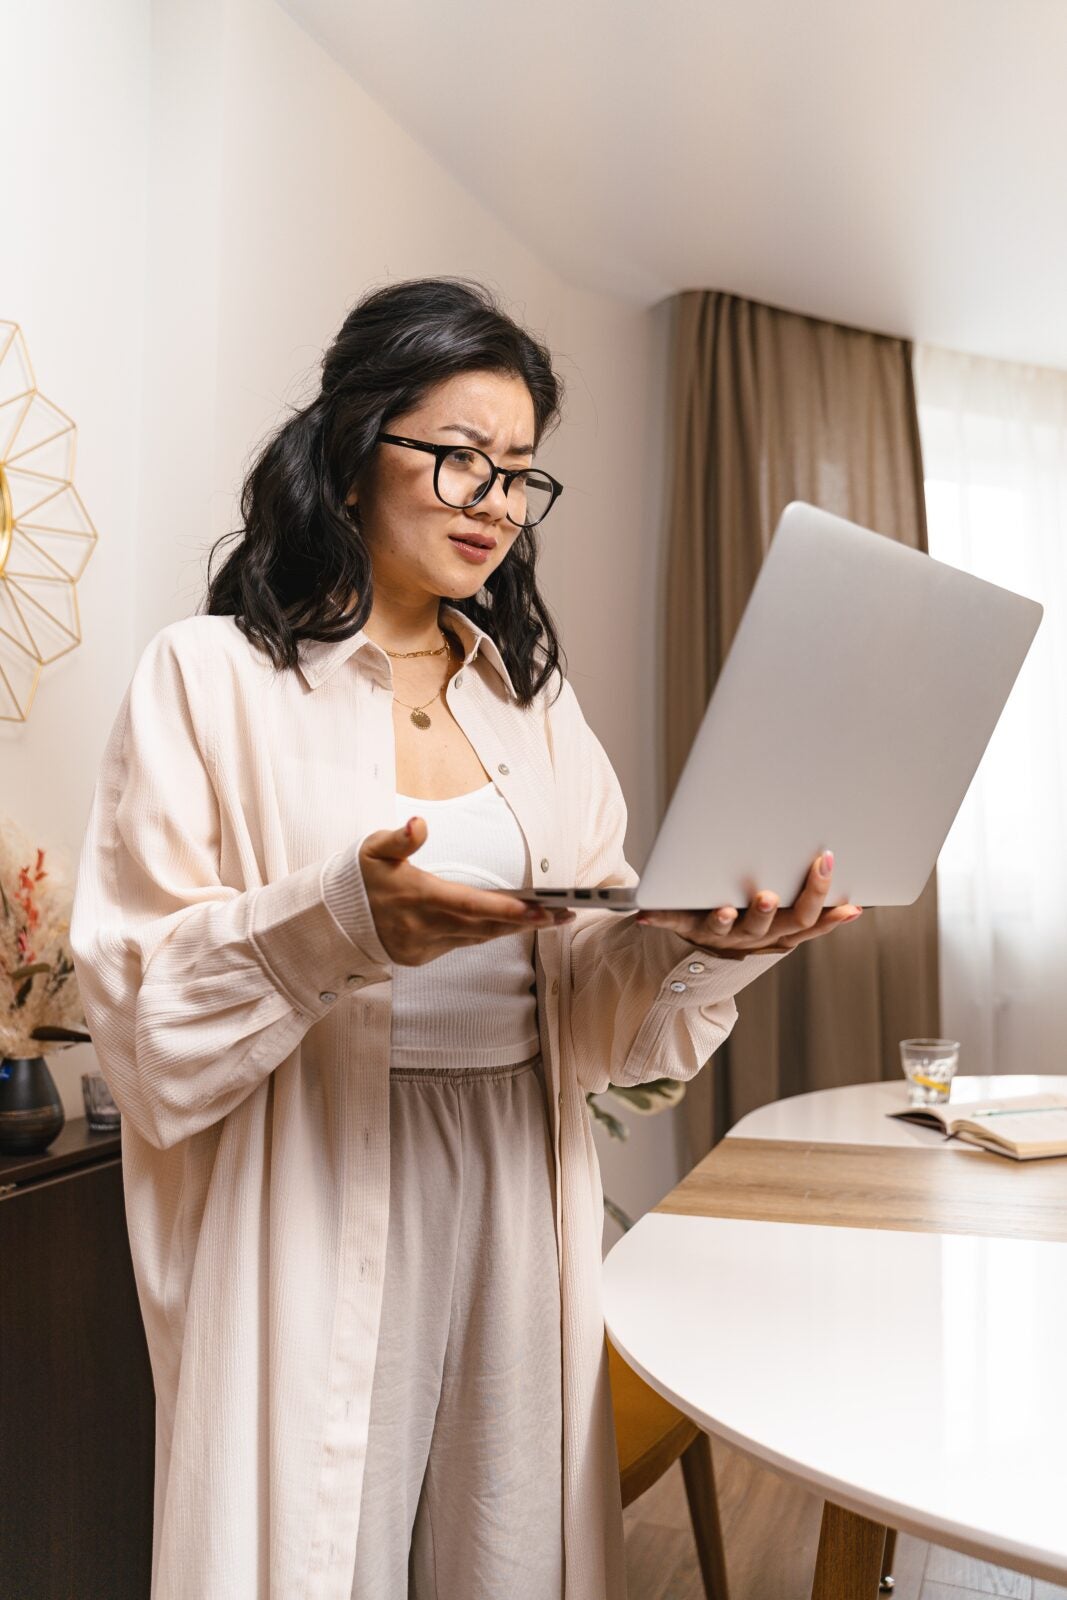 Asian woman wearing glasses, a long shirt and loungewear looking at her laptop with furrowed eyebrows.